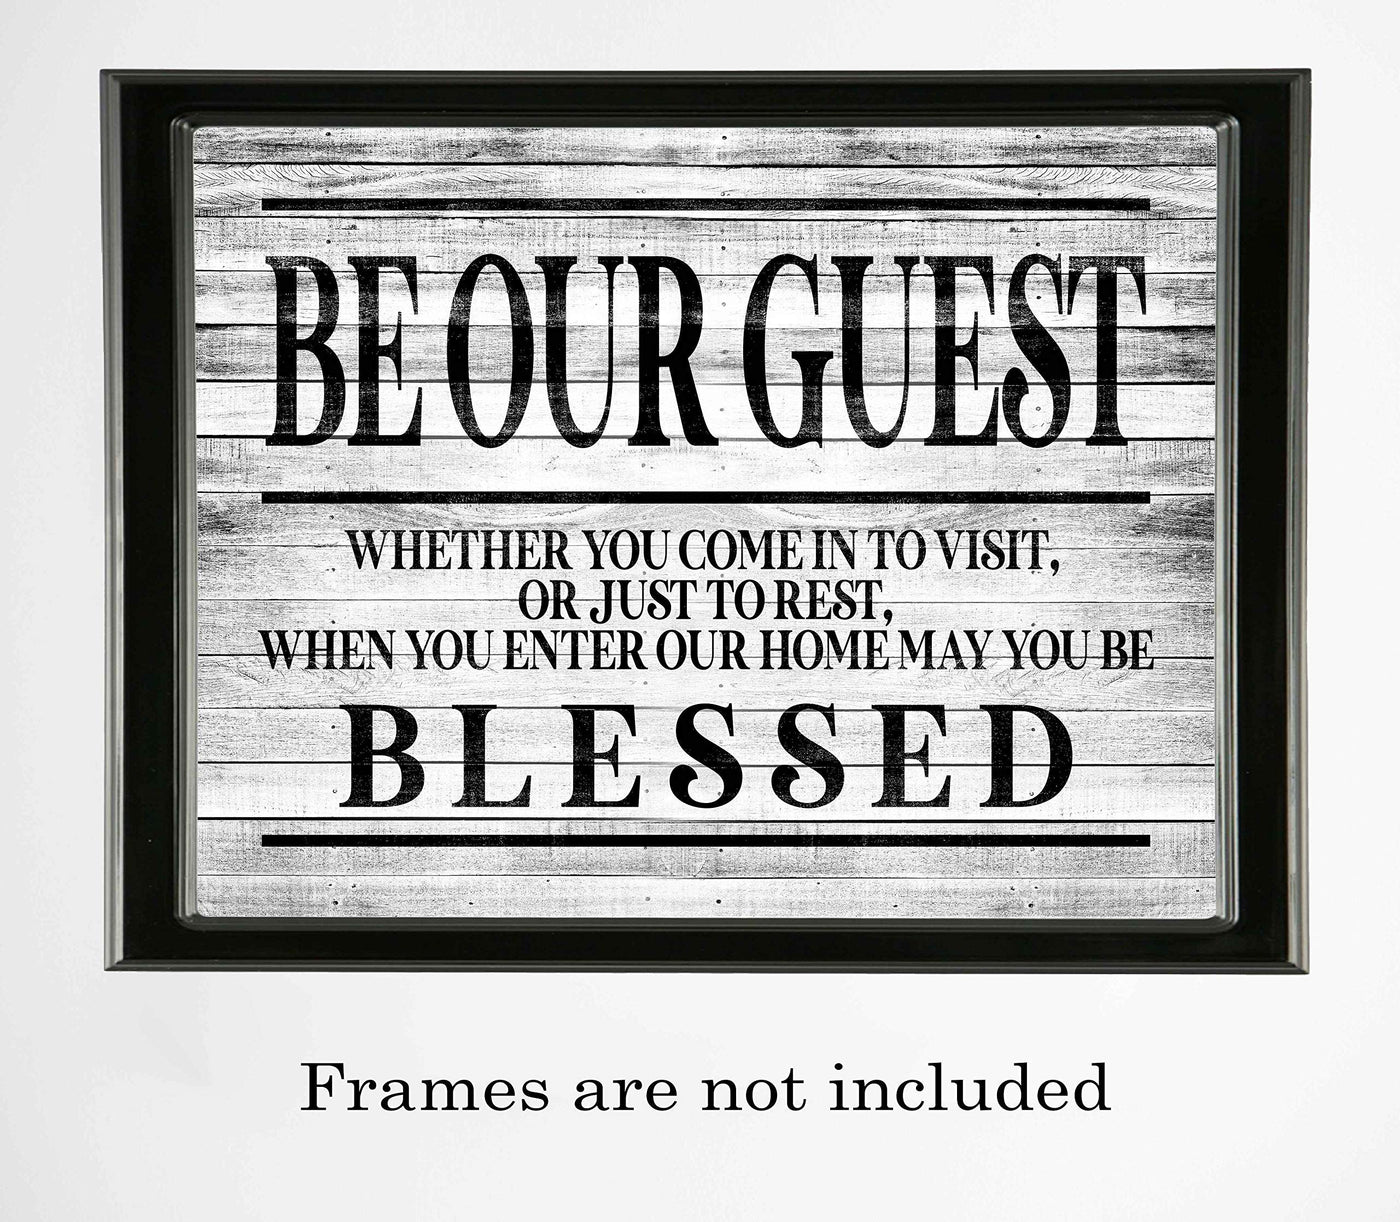 Be Our Guest-May You Be Blessed- Wall Art Sign- 14 x 11"-Ready to Frame. Distressed Wood Replica Wall Print. Perfect Home-Guest Room-Cabin-B&B-Lake-Beach House Decor. Inviting Message for Guests!